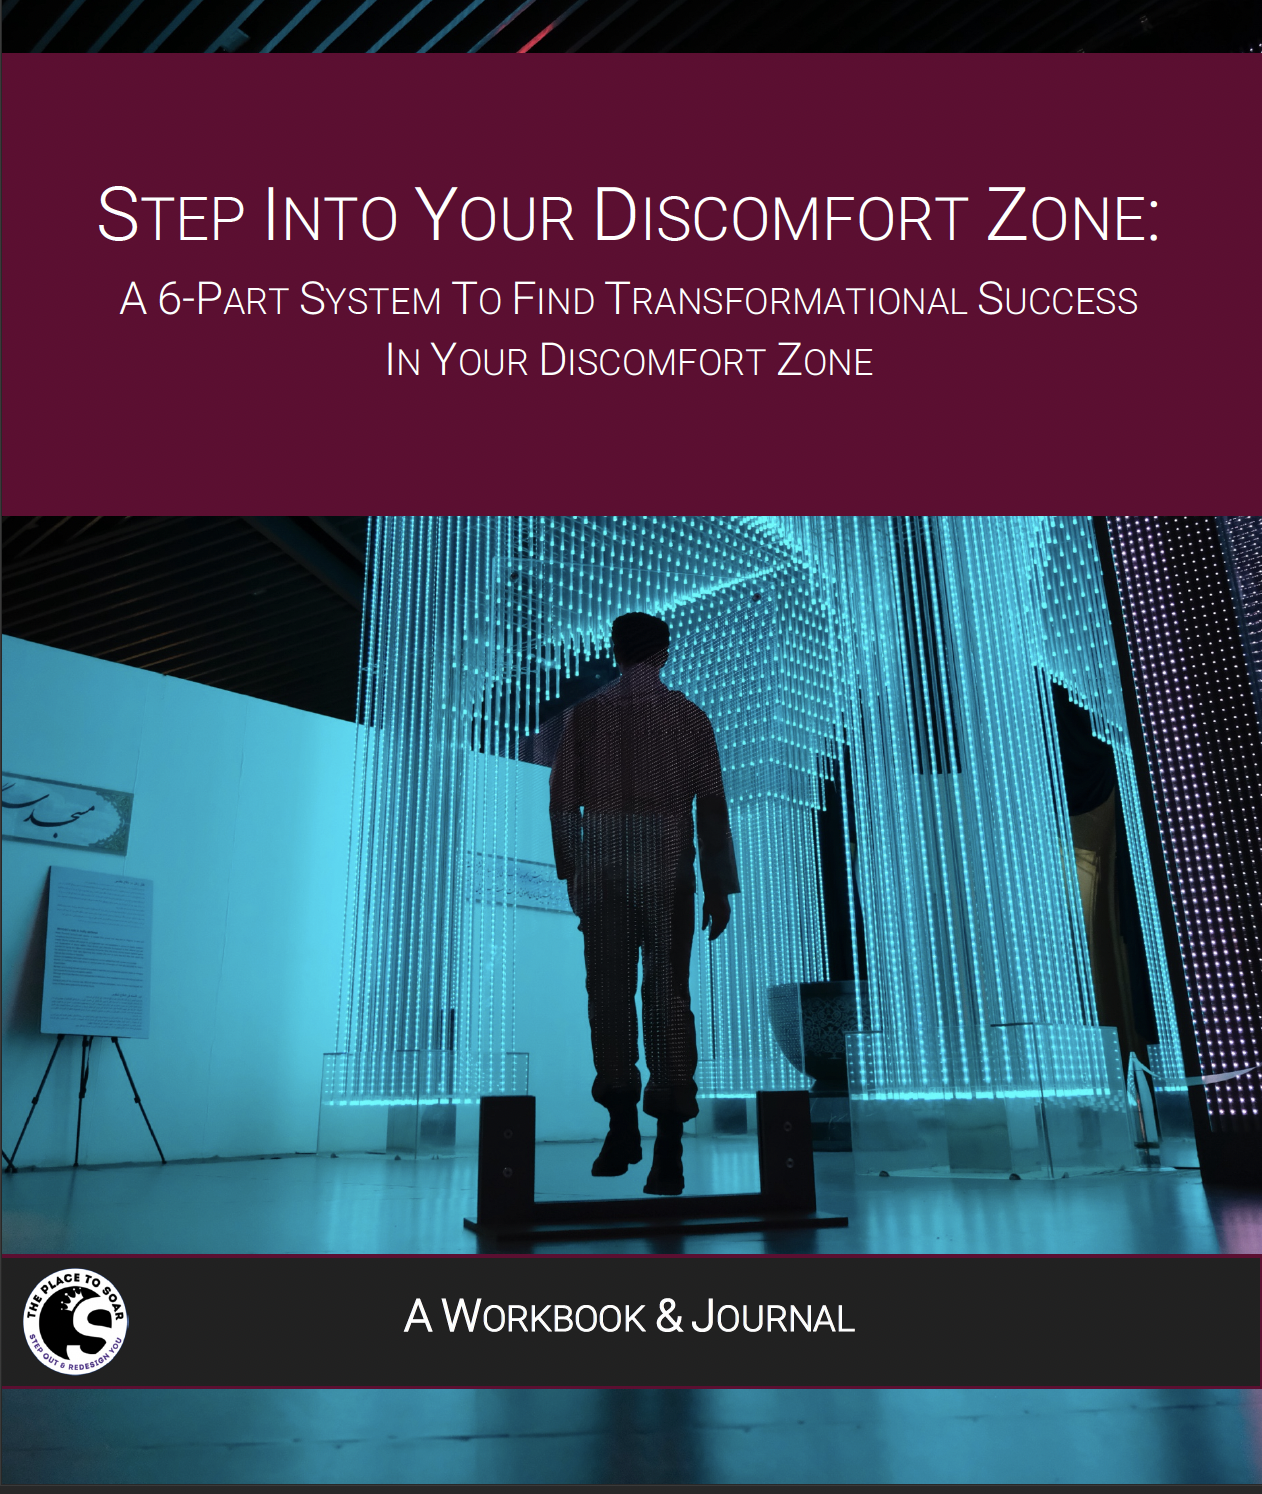 Workbook & Journal - Step Into Your Discomfort Zone: A 6-Part System to Find Transformational Success in Your Discomfort Zone